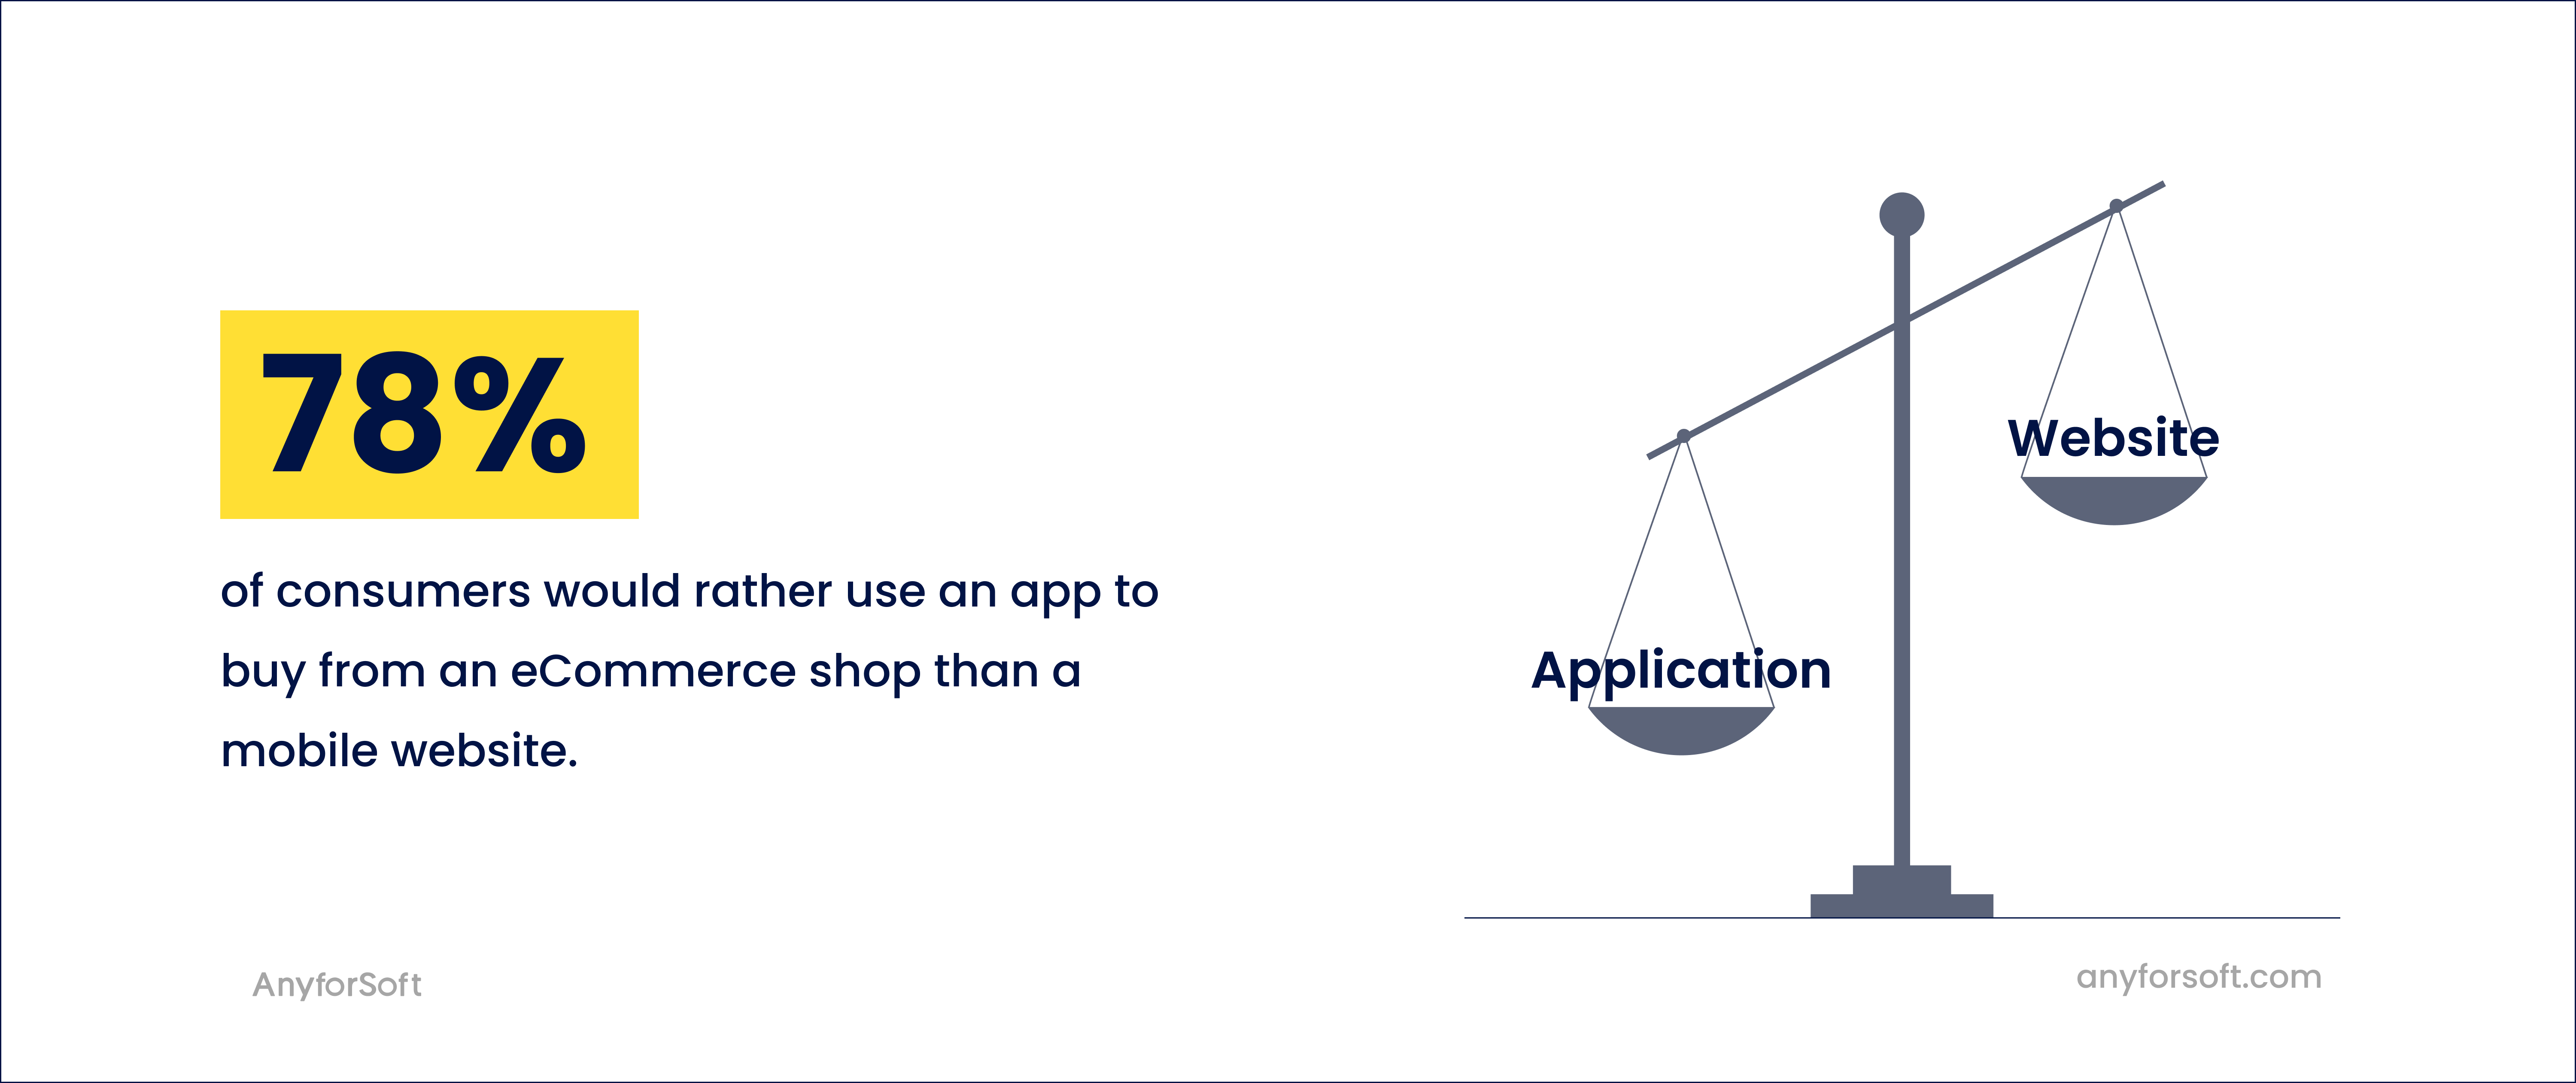 Consumers Prefer Apps to Buy from eCommerce Stores